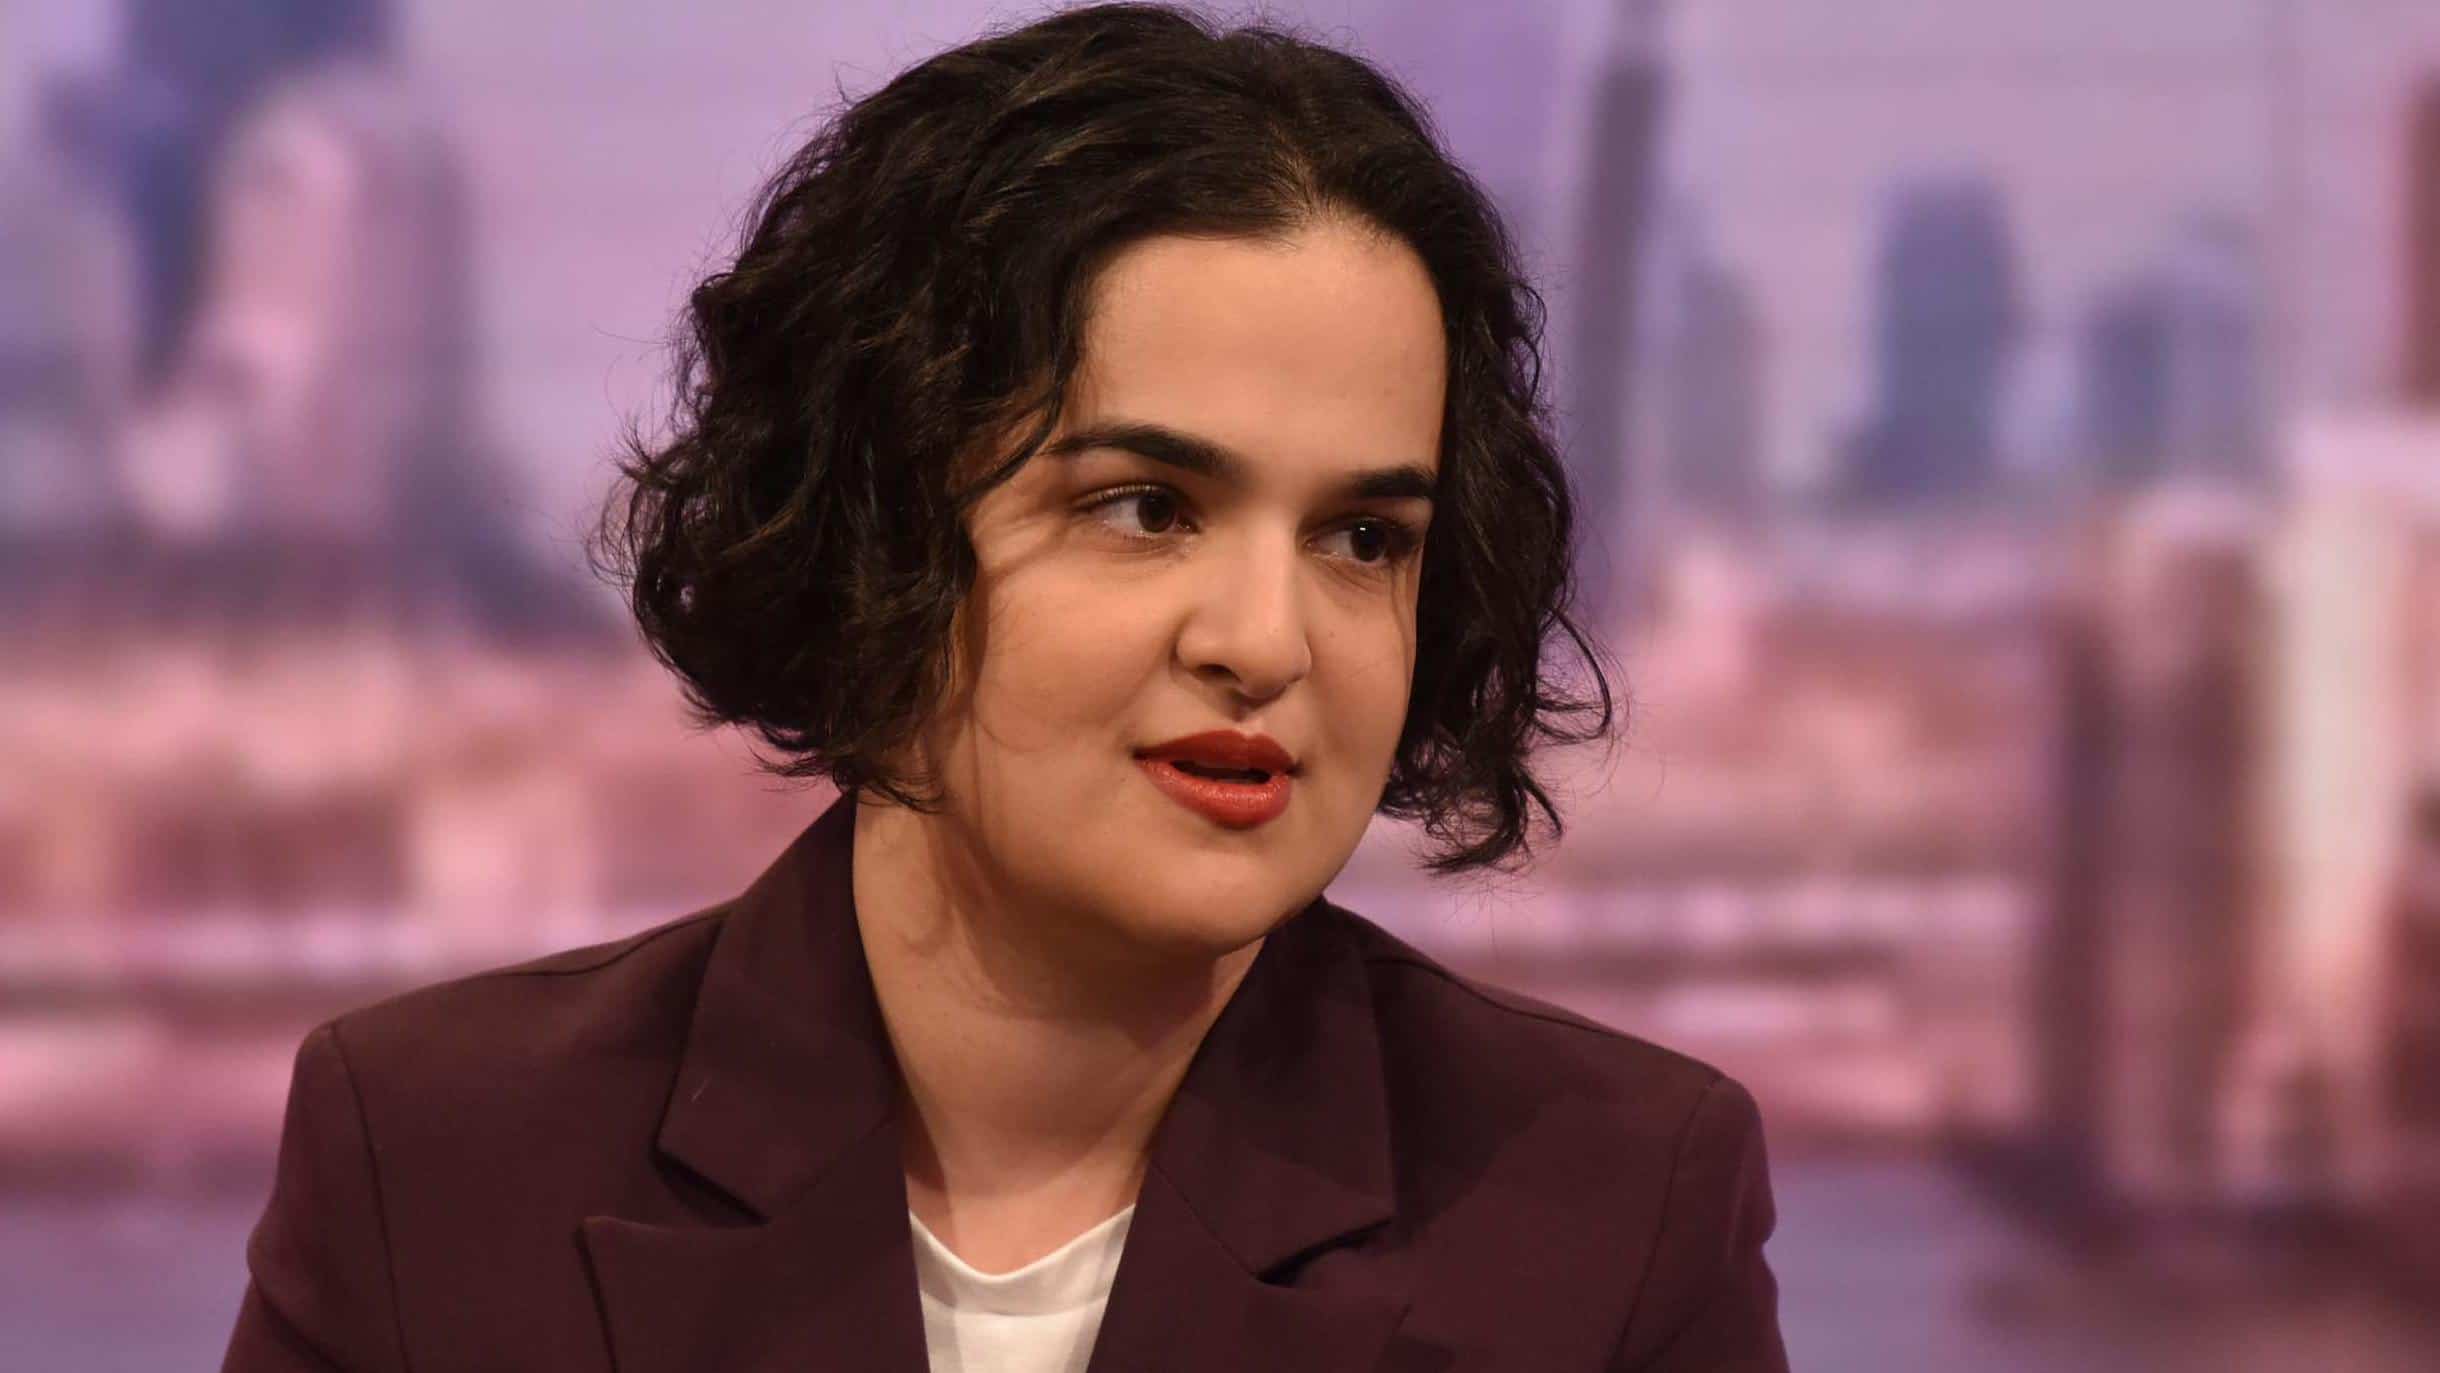 I was sacked as temporary carer for speaking out about PPE, Labour MP claims